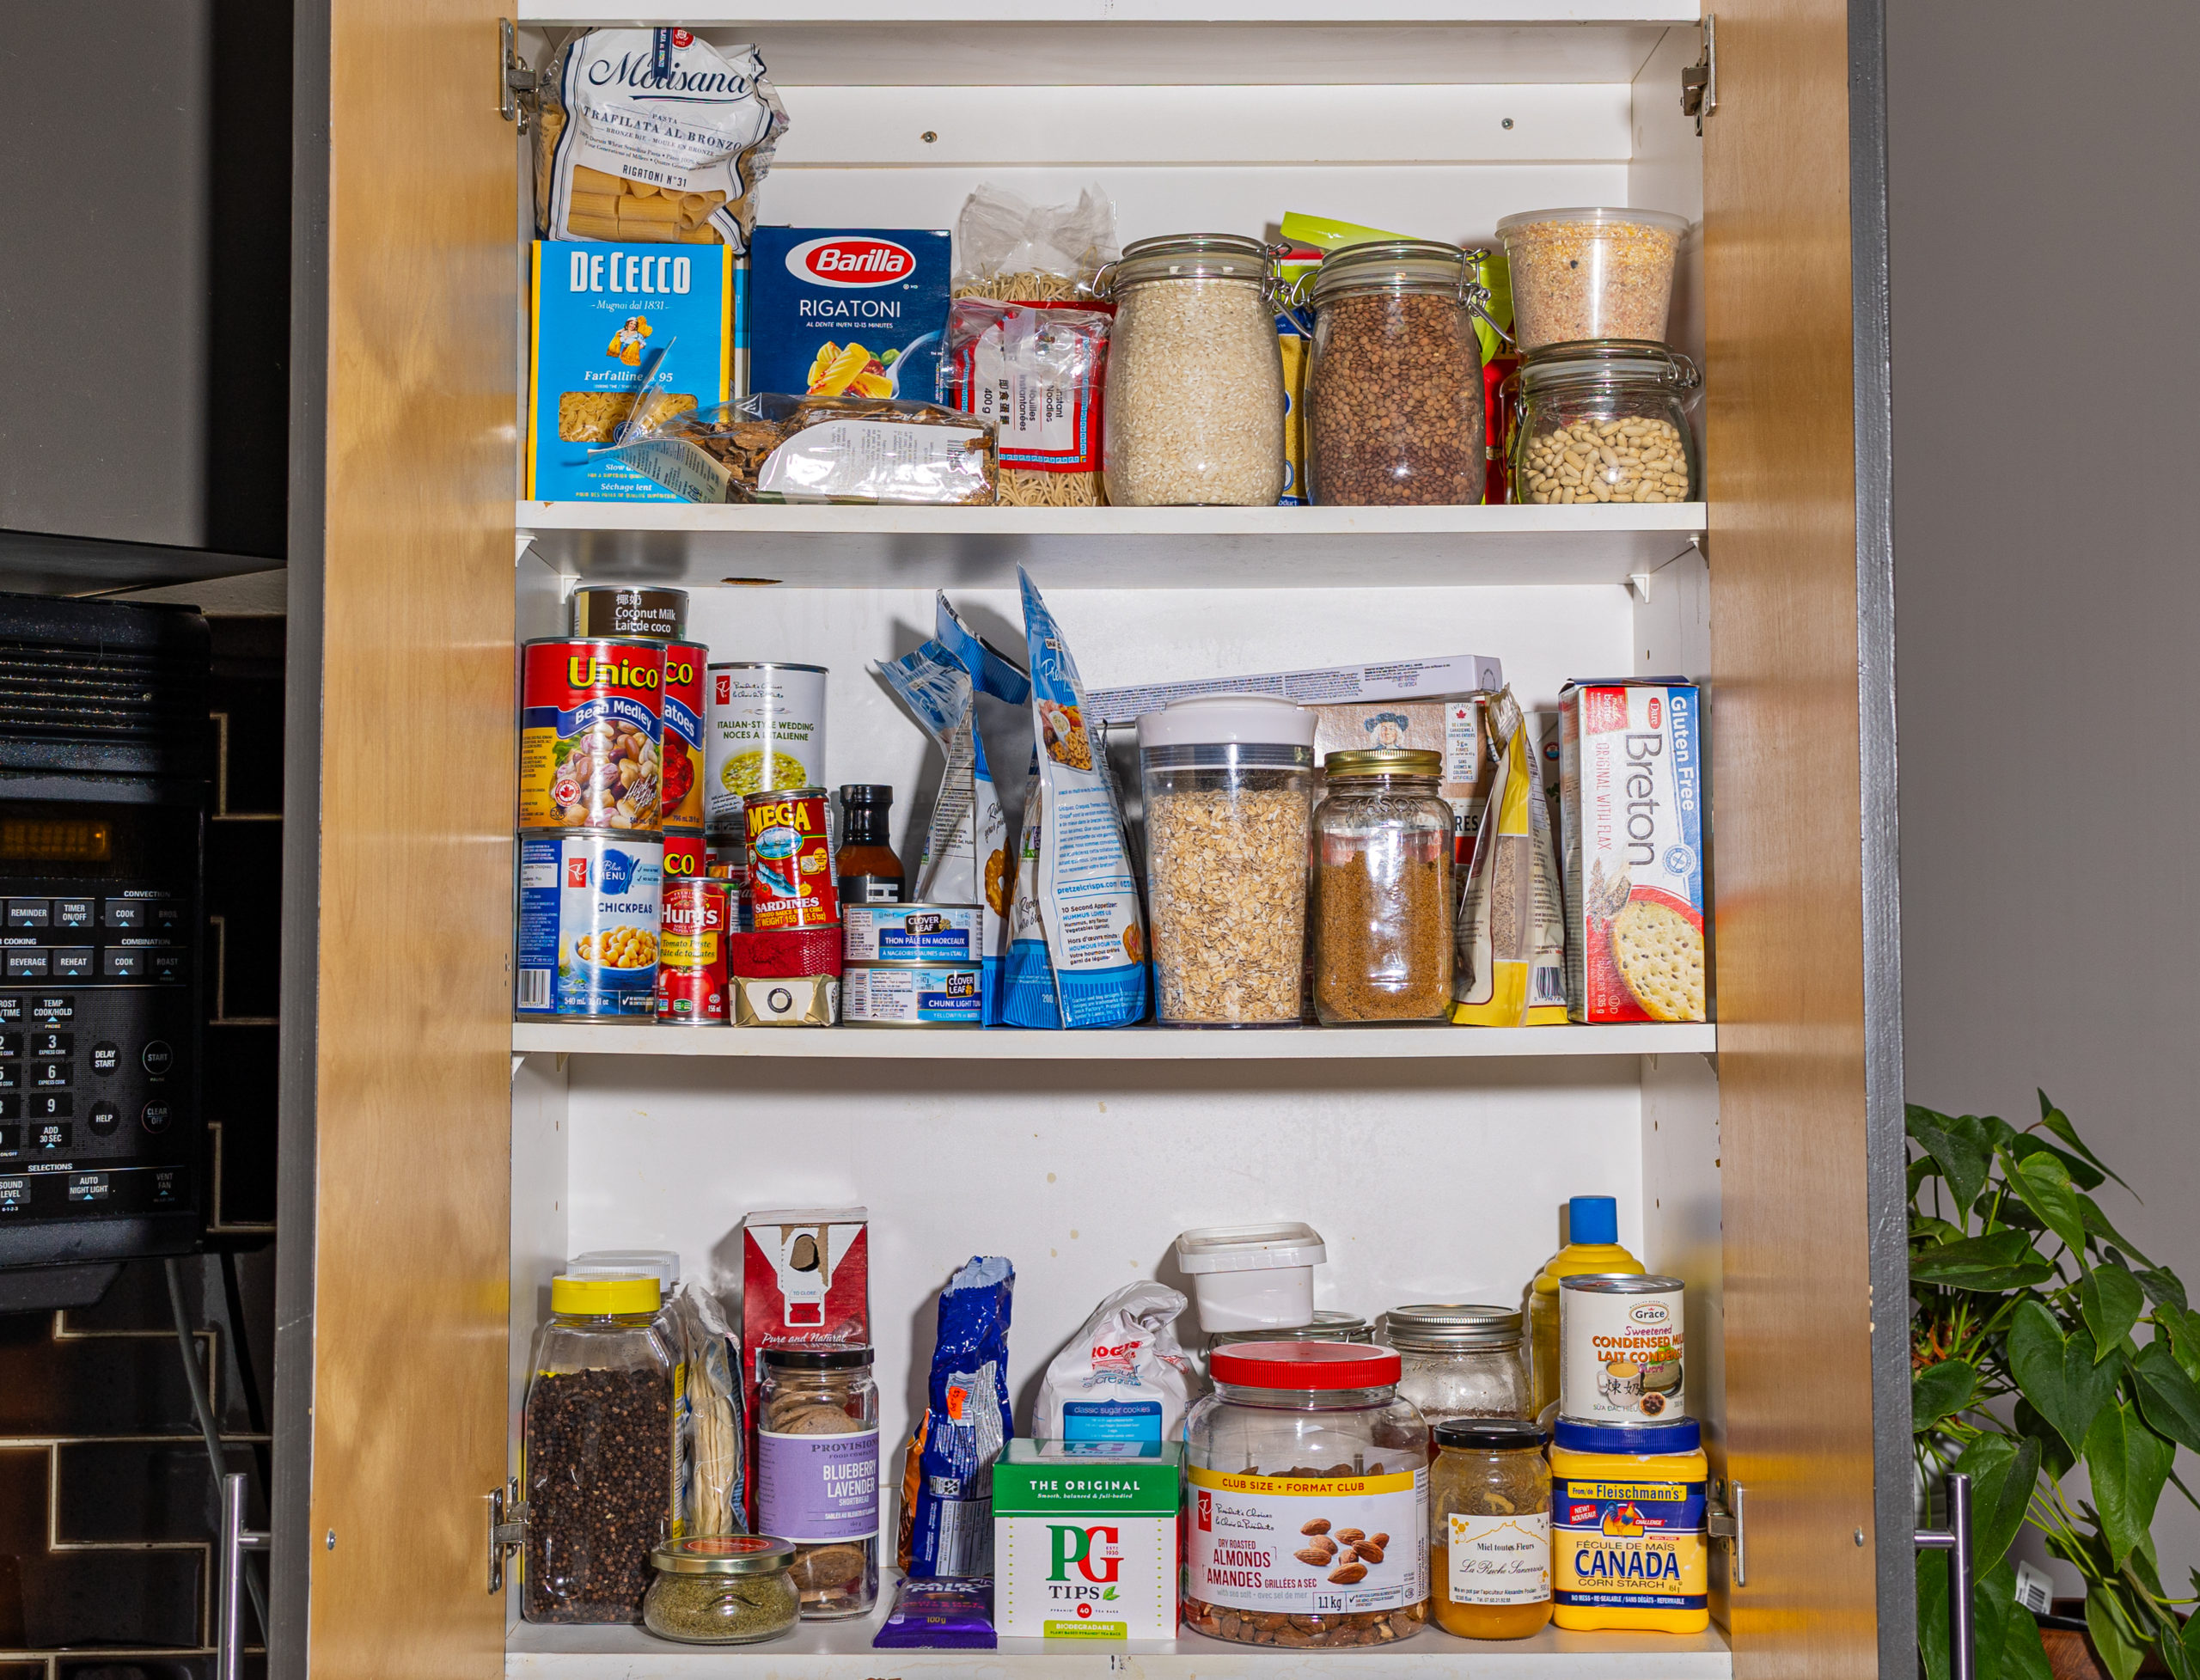 A peak inside the chef's pantry